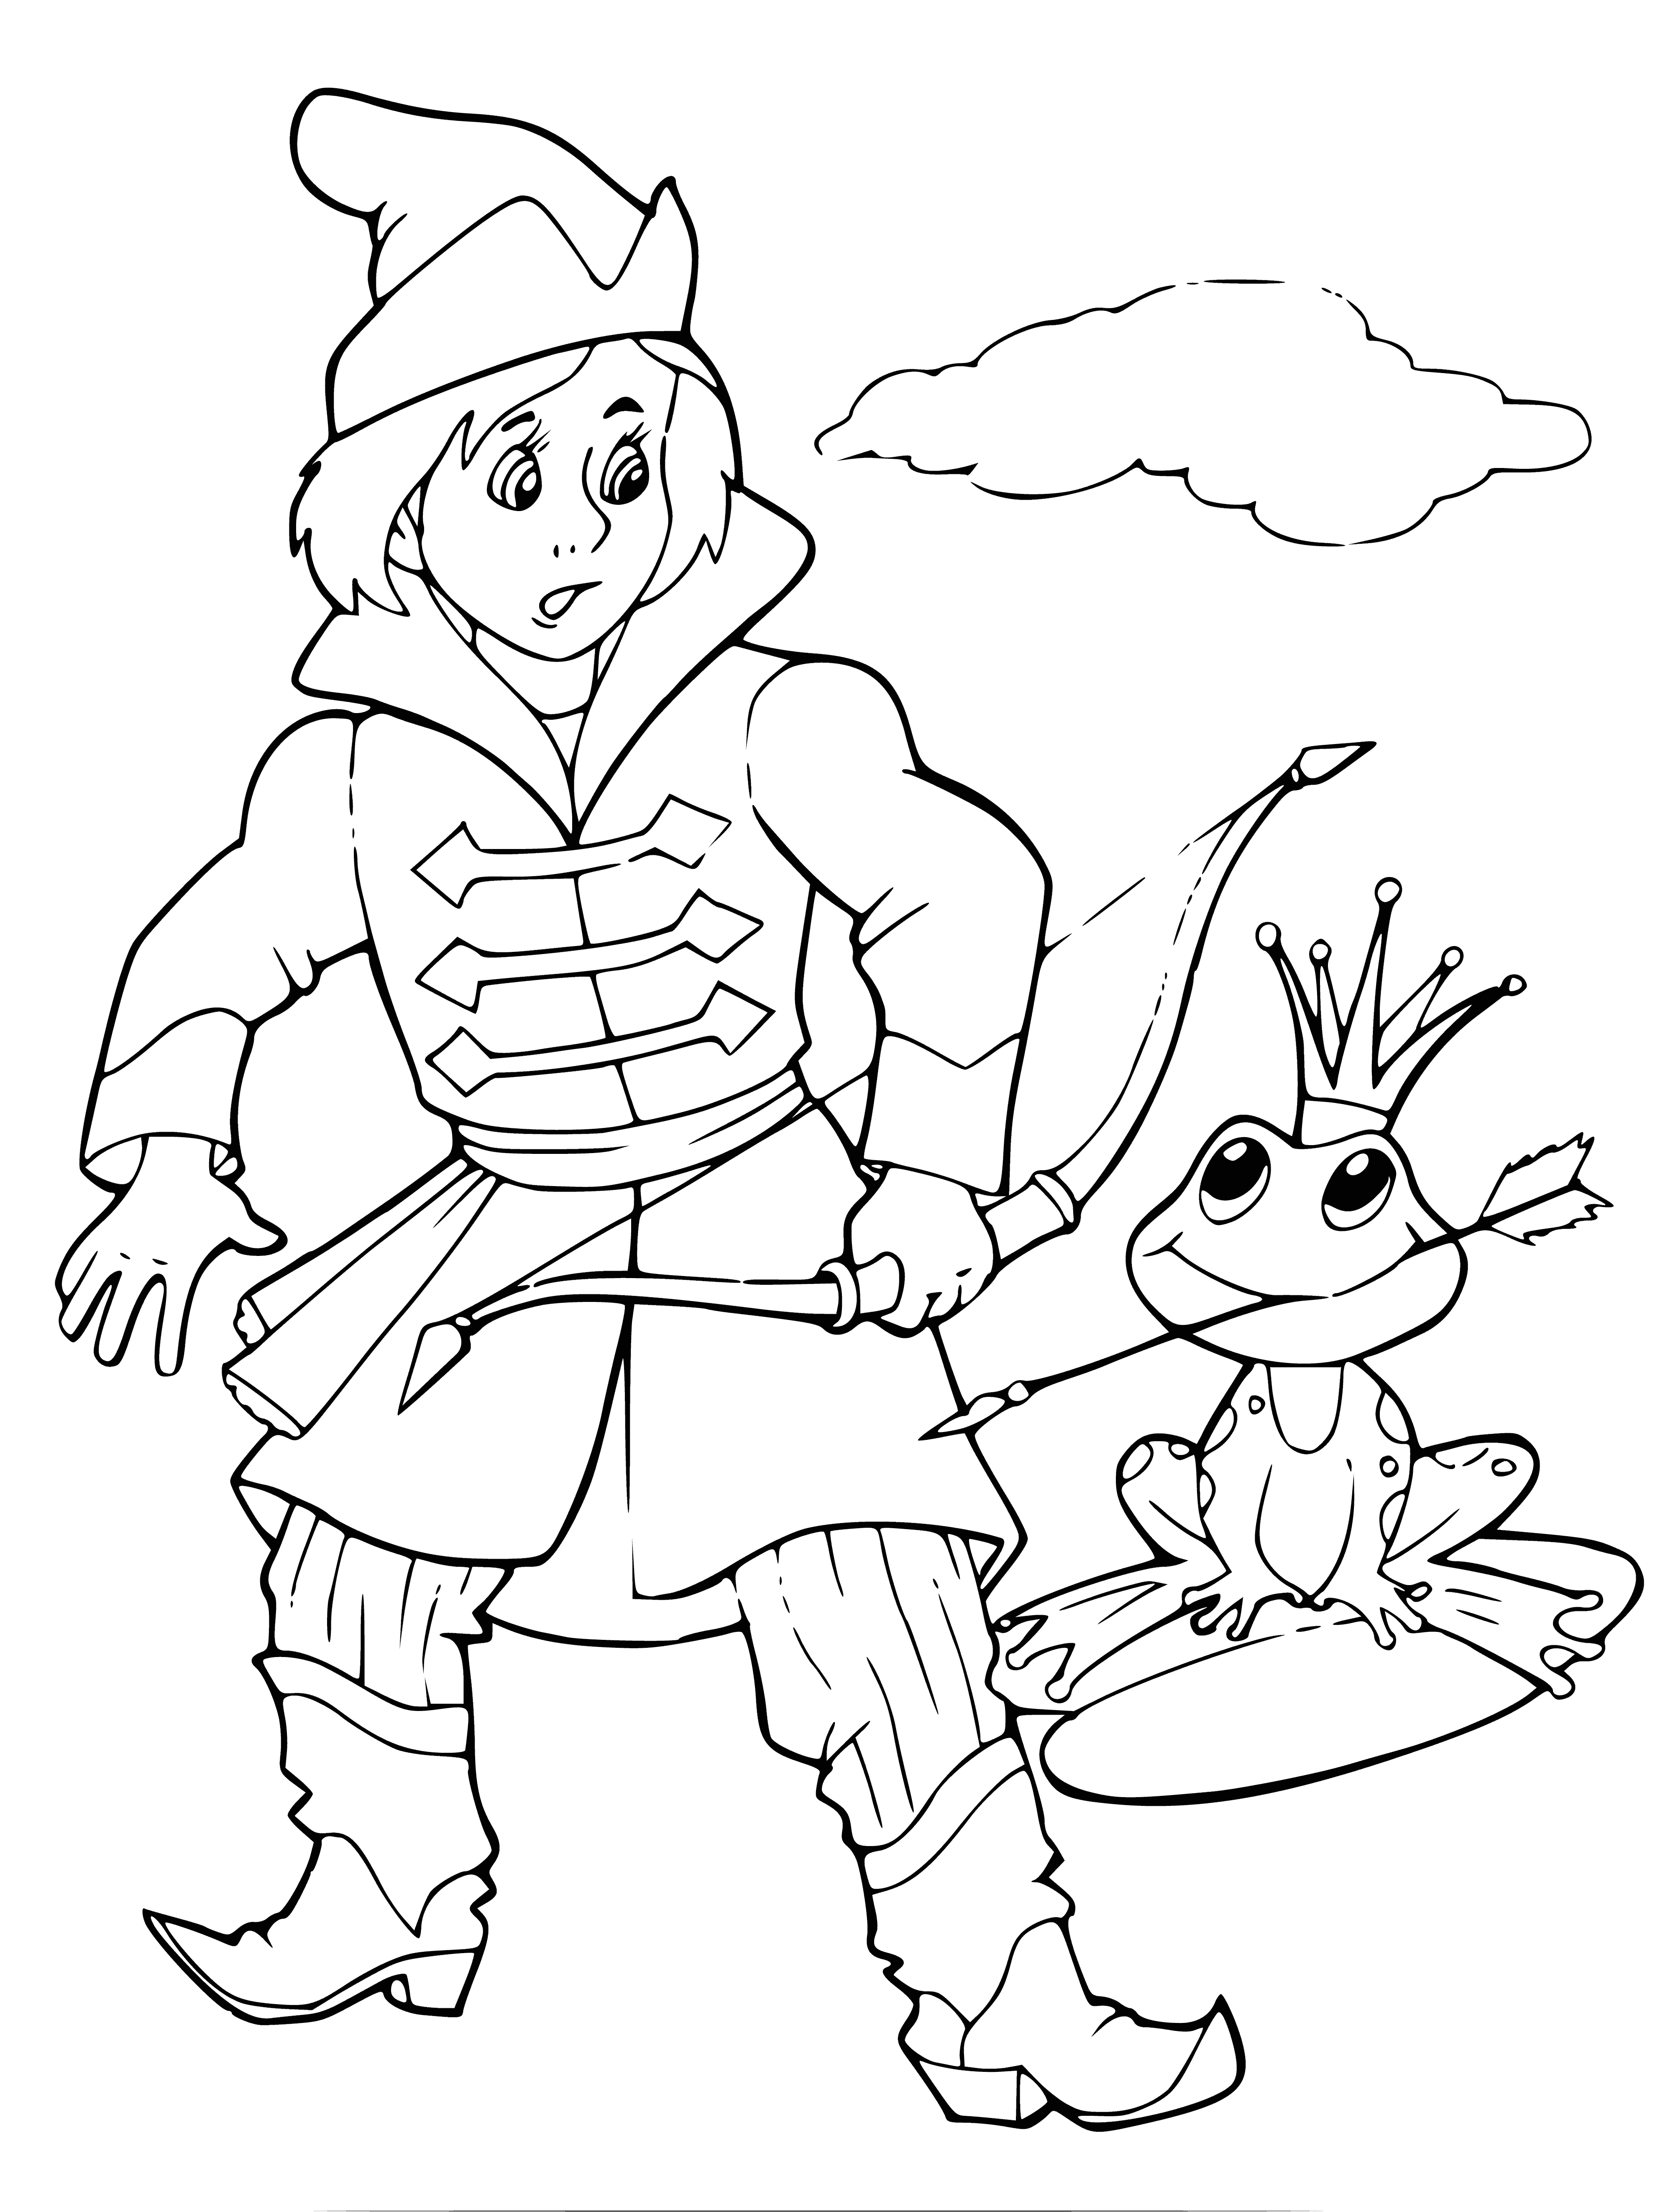 coloring page: Ivan Tsarevich, clothed in blue and red, stands in the forest with bow & arrows and sword, aiming at a crowned frog wearing a jeweled necklace.